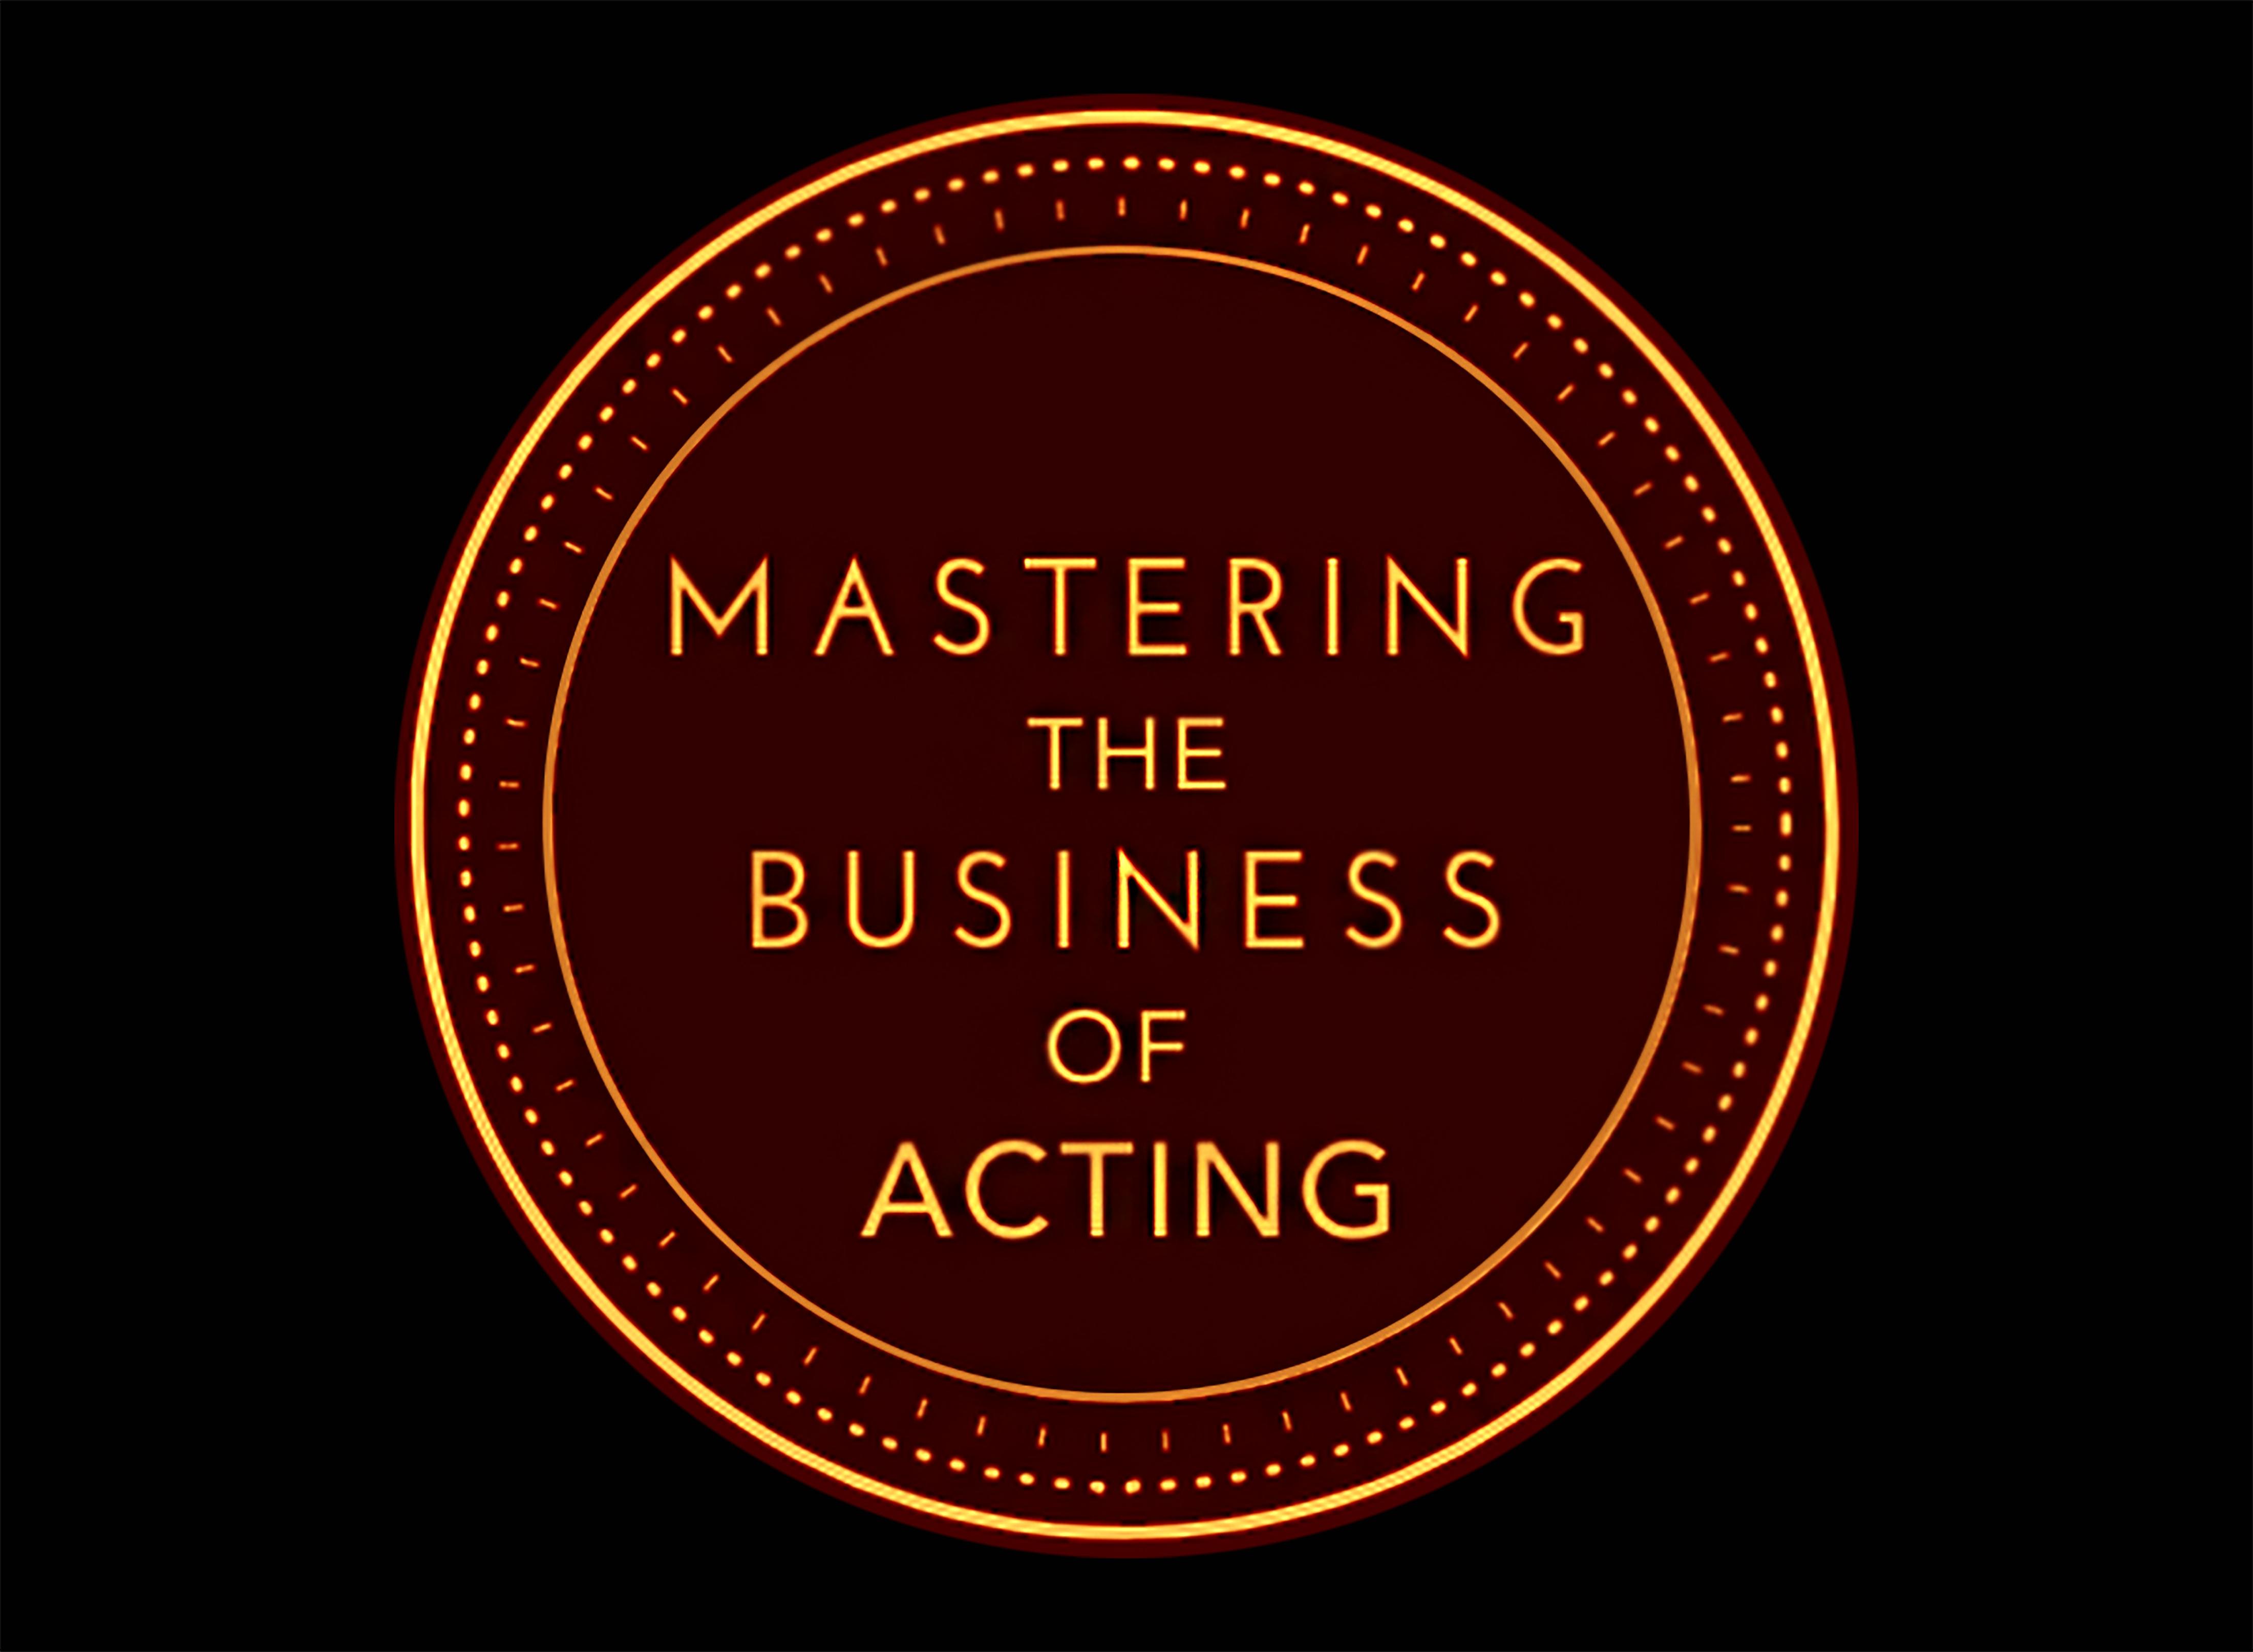 Mastering the Business of Acting